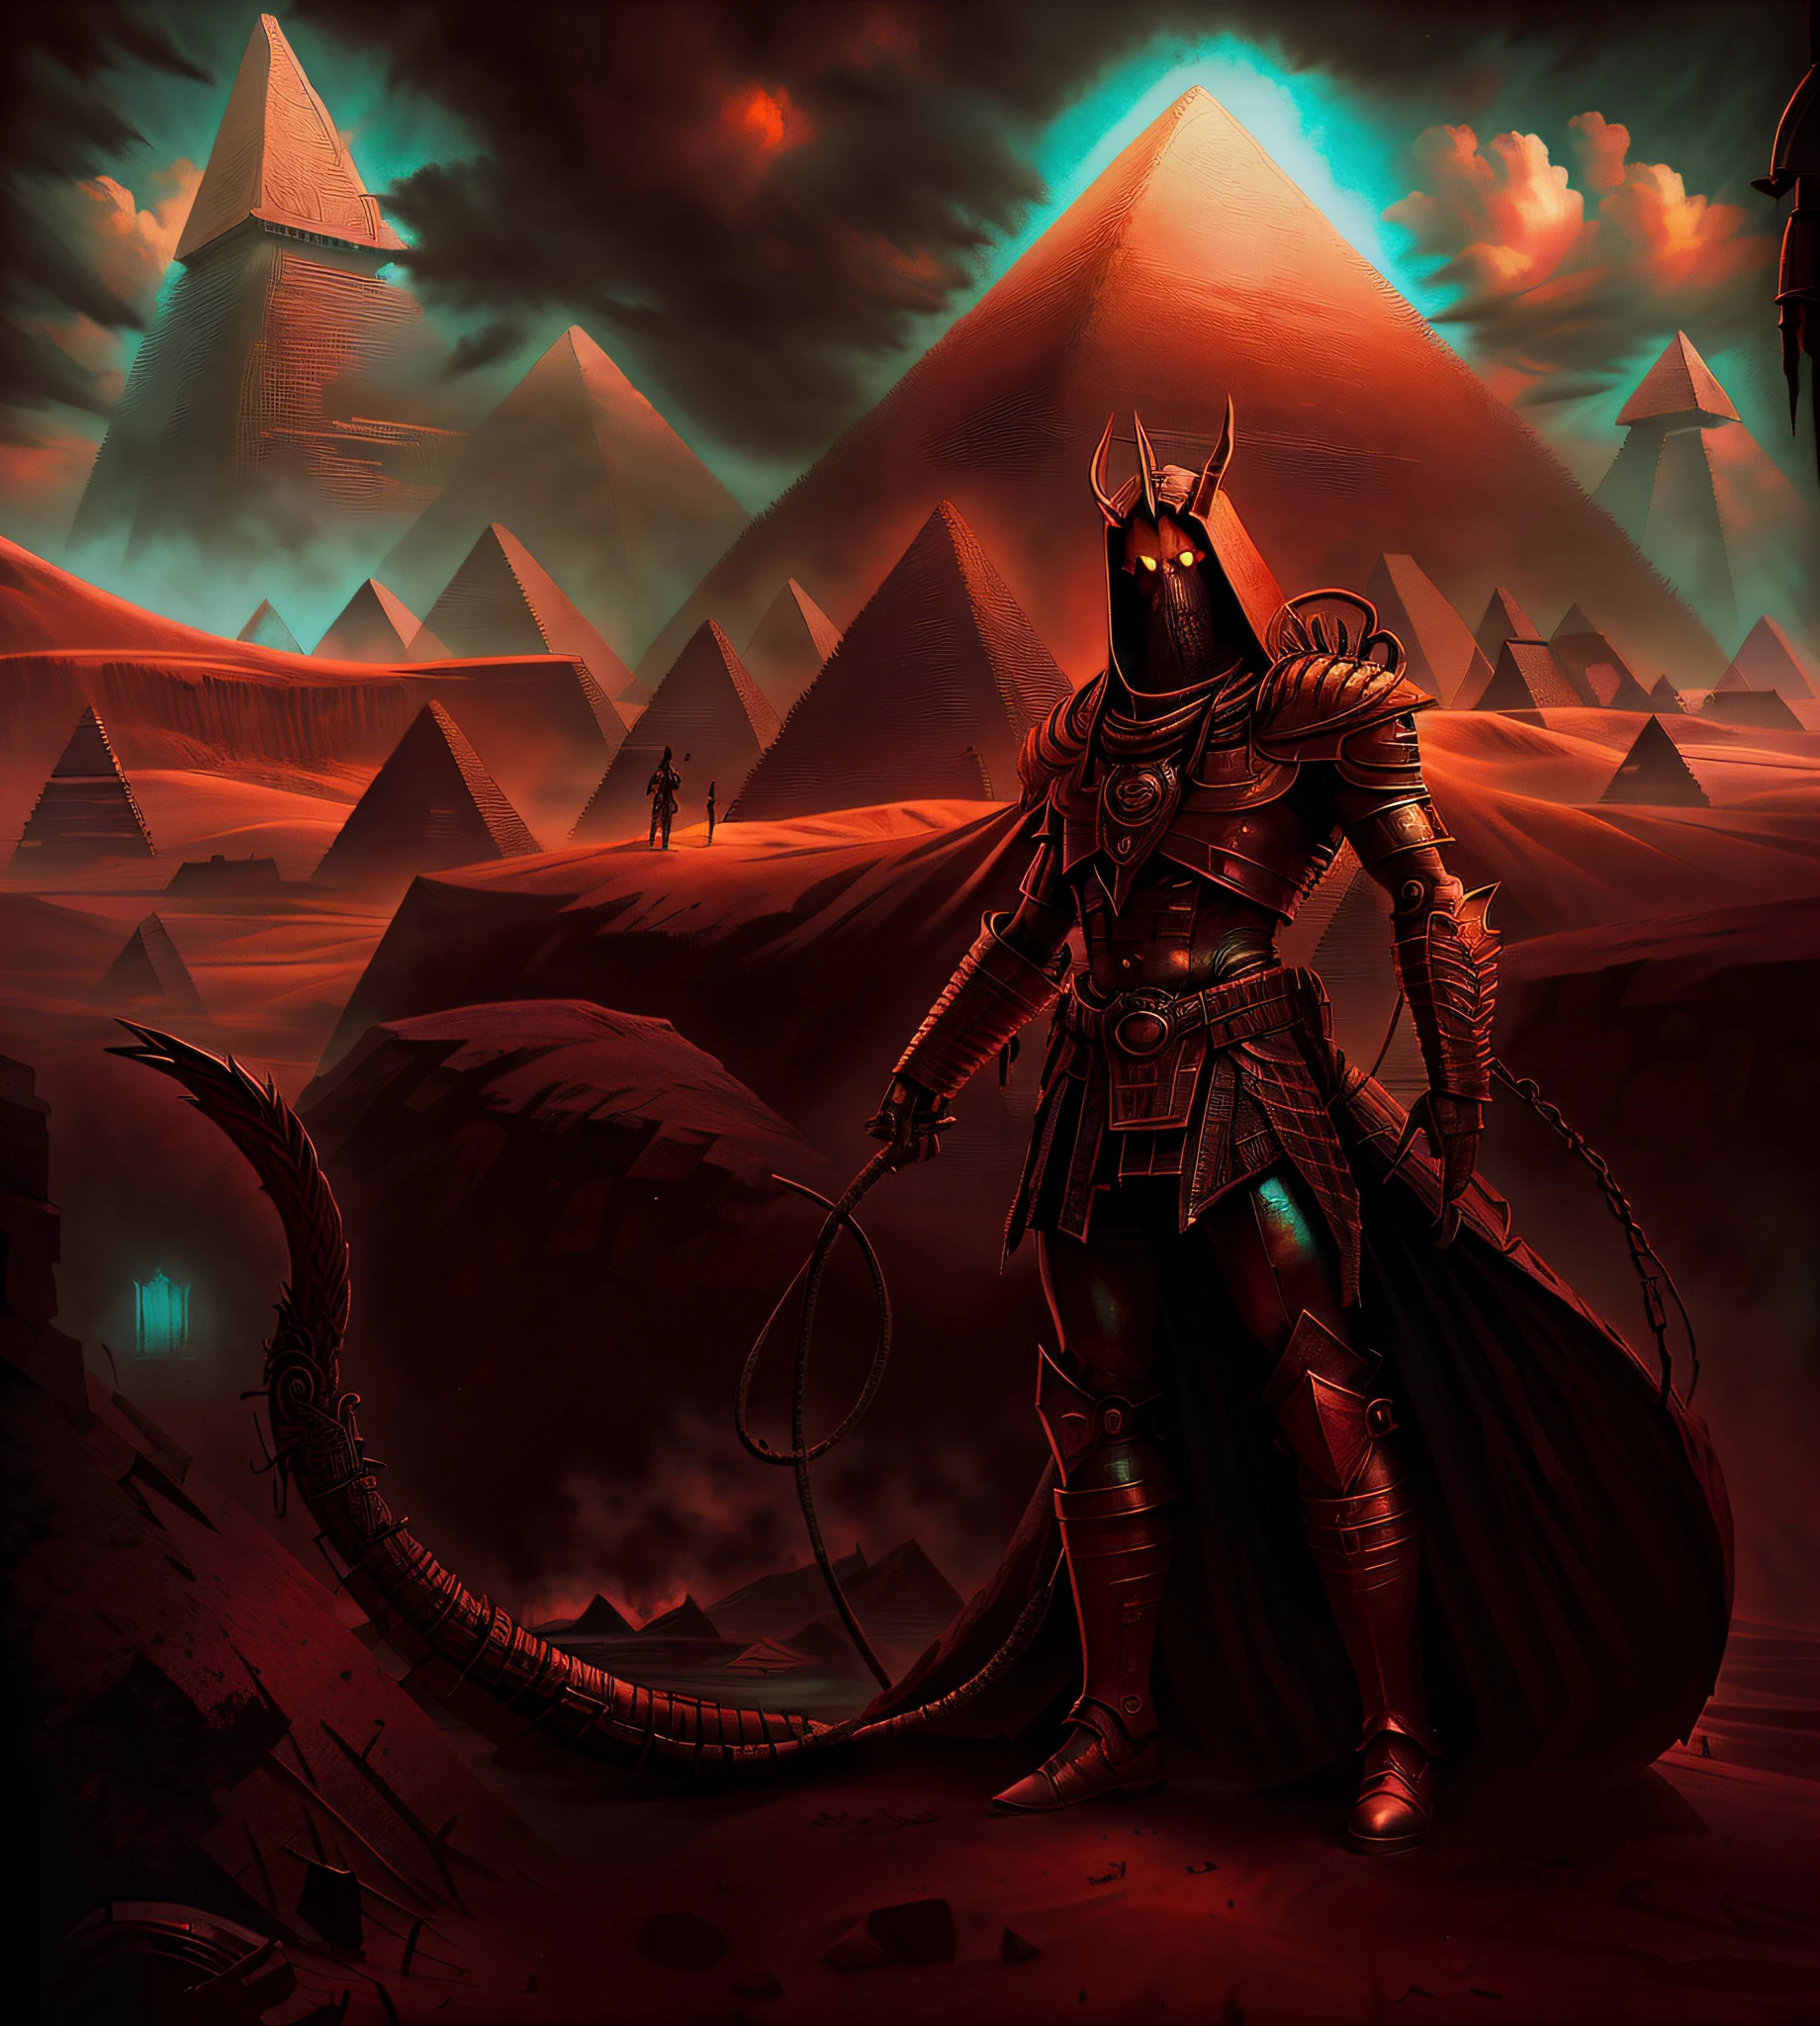 there is a man standing in front of a giant pyramid, detailed cover artwork, dark soul concept, nyarlathotep, album cover concept art, apocalypse art!!!!, shai-hulud, just art for dark metal music, dark high-contrast concept art, dark concept art, dark soul concept art, official artwork hdr